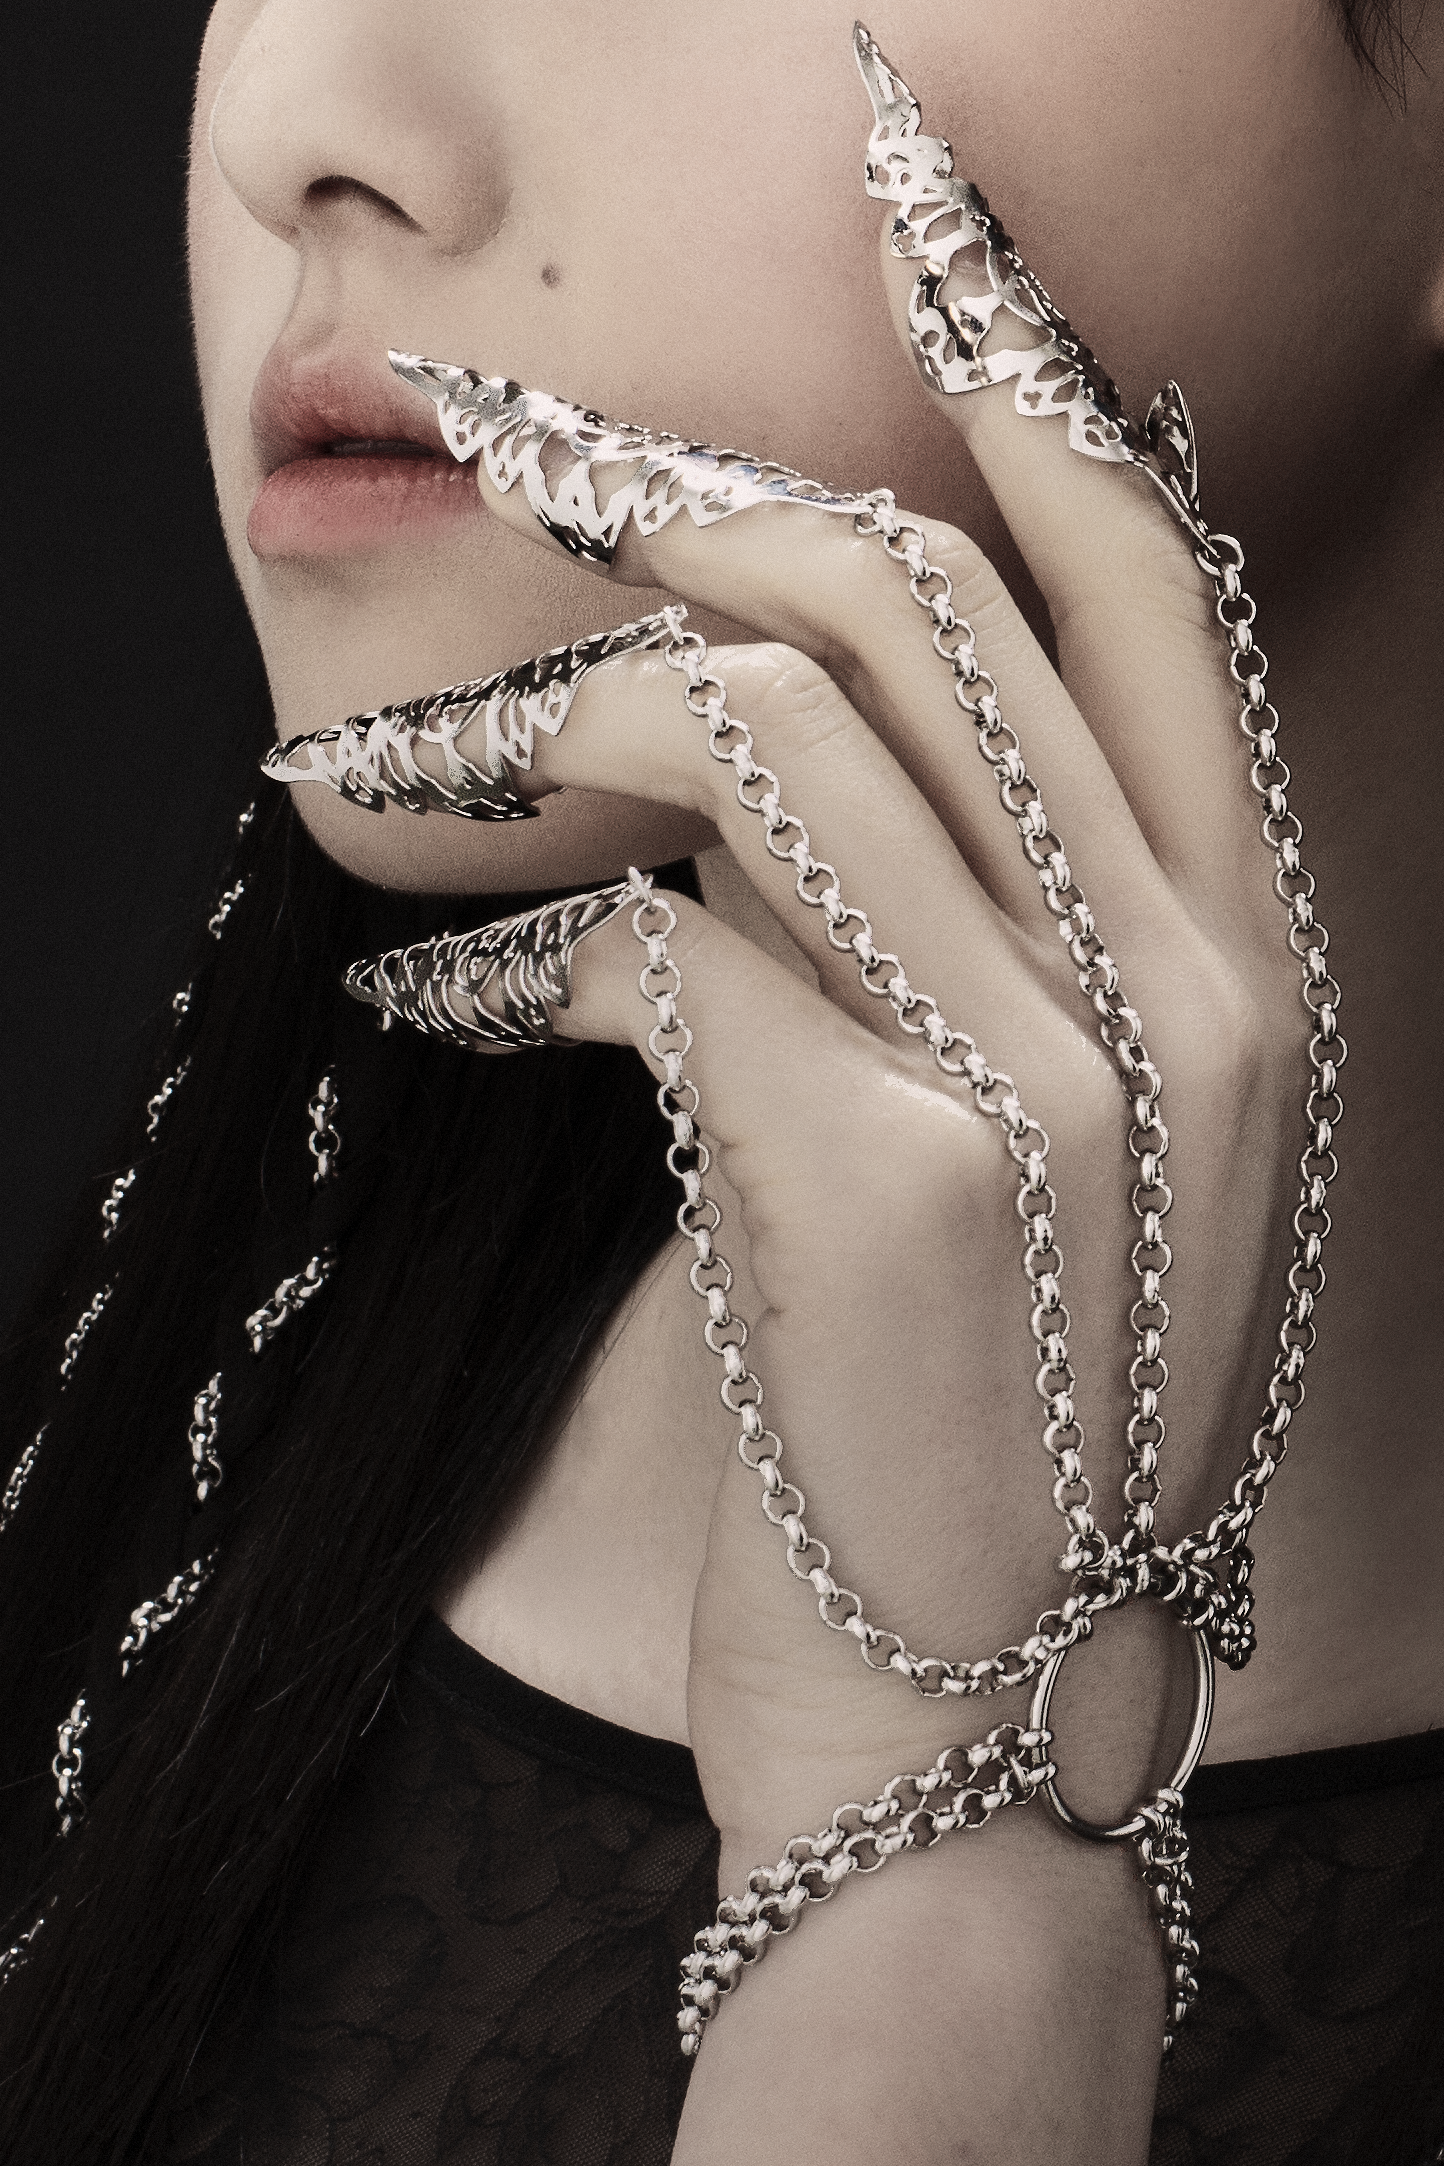 A dramatic hand chain bracelet with nail claws from Myril Jewels enhances the beauty of a gothic look. With its neo-gothic flair, this jewelry piece is a striking choice for Halloween, goth-inspired everyday wear, or as a bold accent for festival outfits and drag queen glamor.